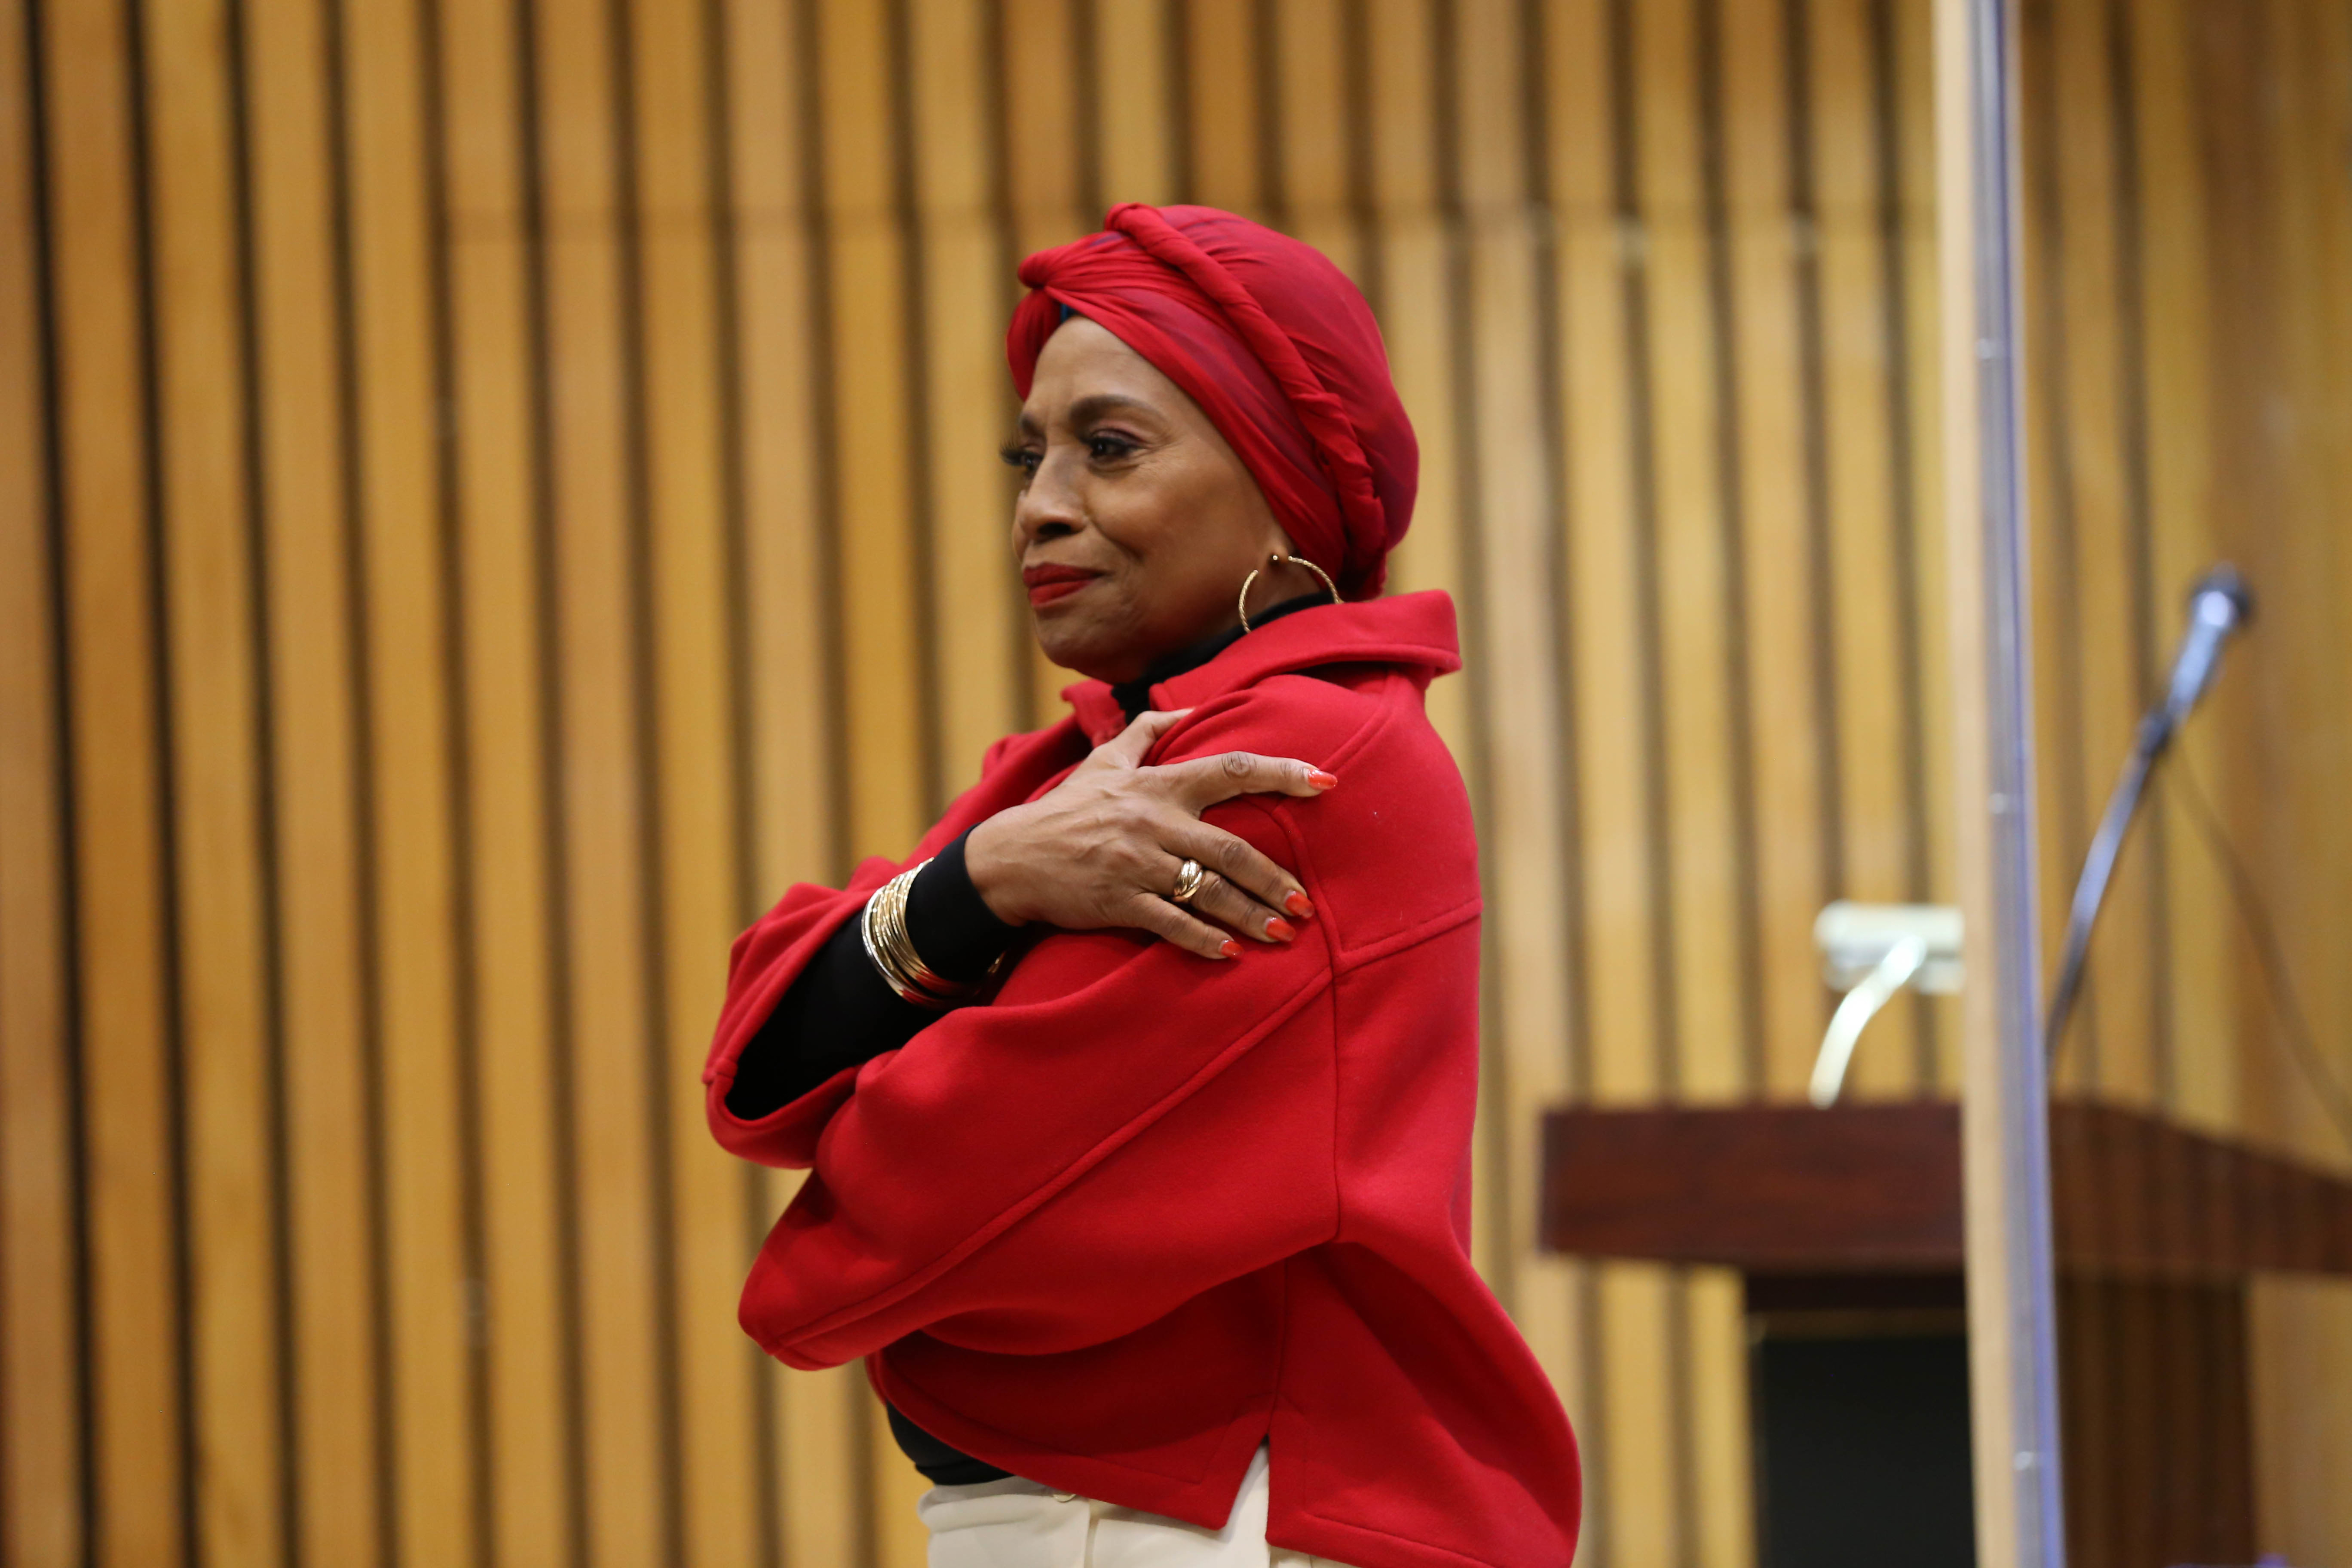 Jenifer in a headwrap and top with arms crossed standing by a podium